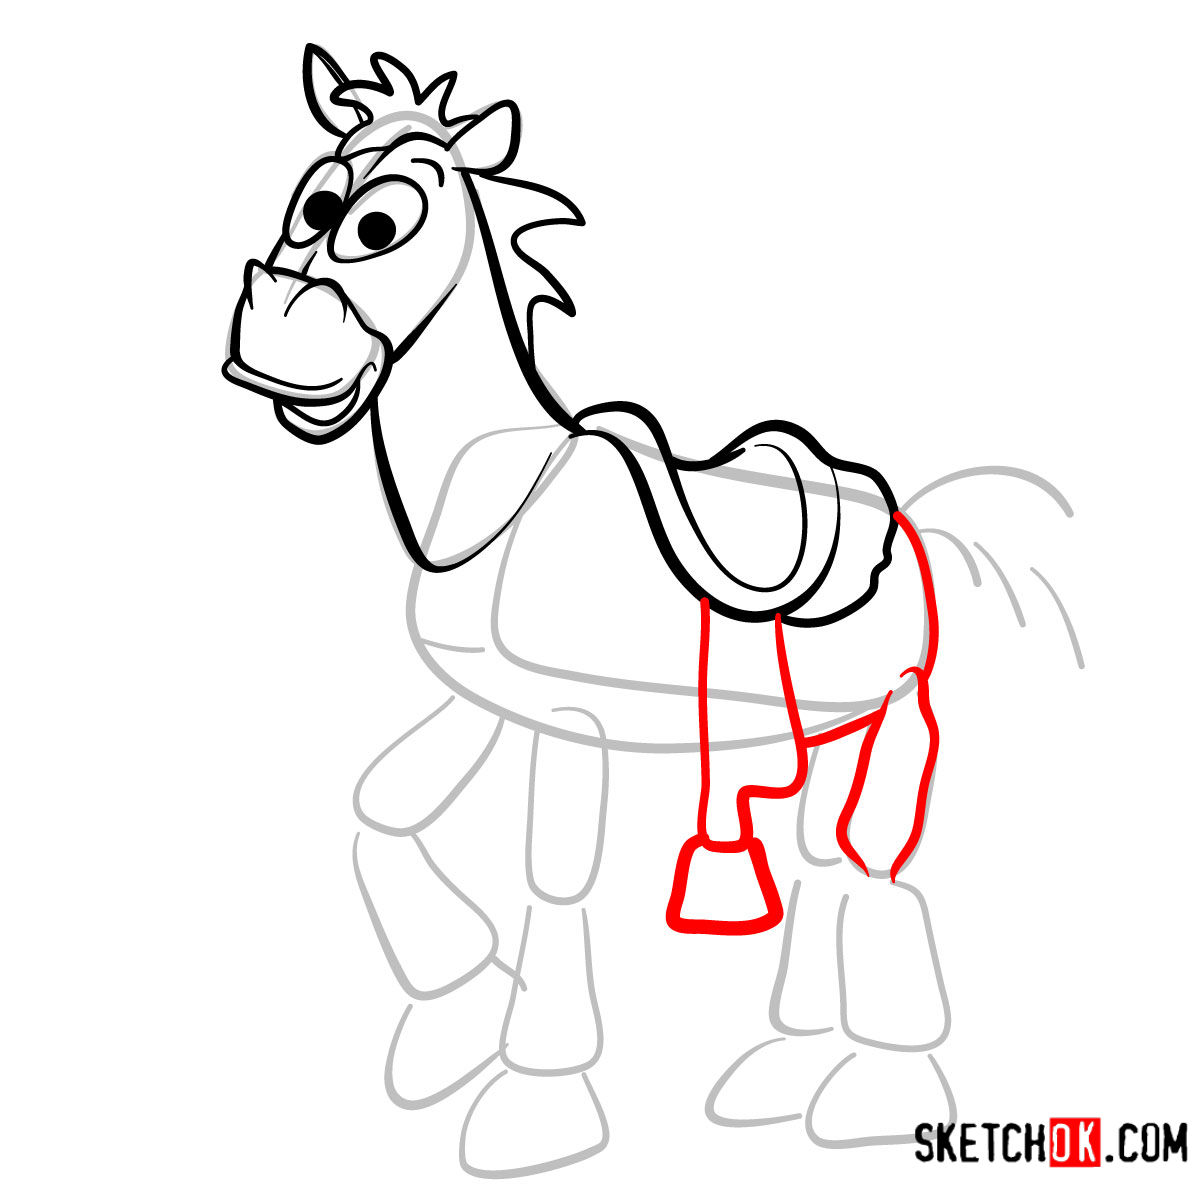 How to draw Bullseye from Toy Story - step 07